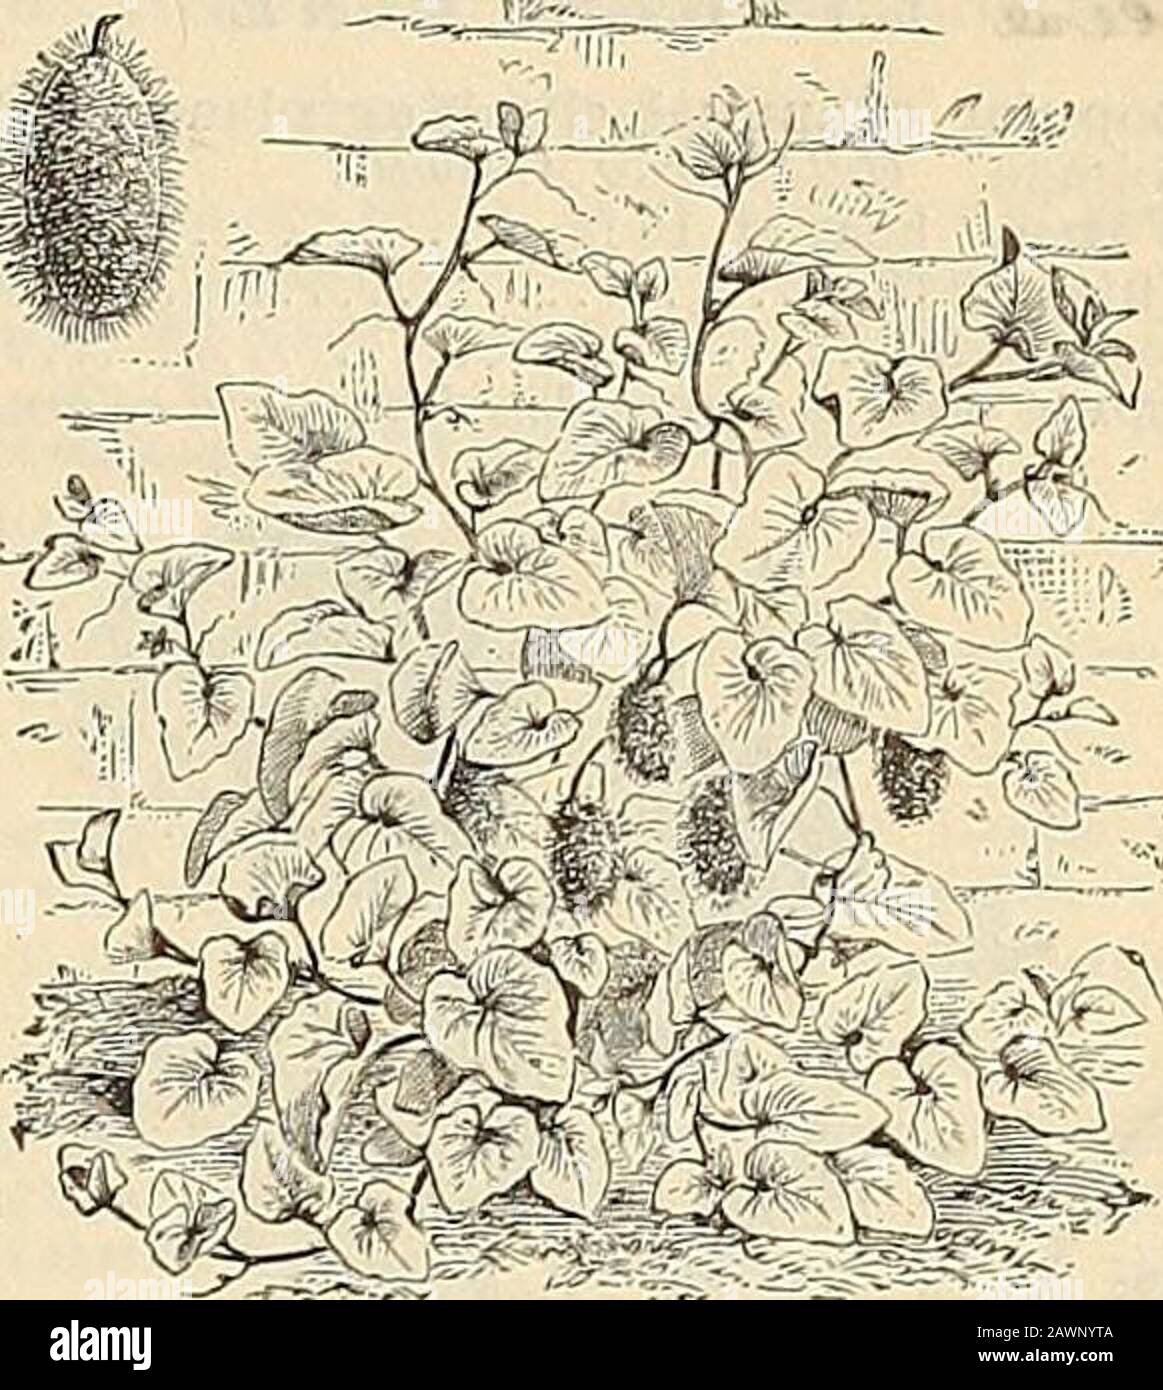 Peter Henderson & Co.'s catalogue of everything for the garden : 1880 . his is a useful plant for borders, but isof little beauty after warm weather sets in. Hardy Peren-nial. Cowslip. Tine mixed English. % ft 5 CRUCIANELLA. A very pretty free-flowering plant, useful for rock-work, vases, etc. Hardy Perennial.Crucianella Stylosa. Pink,from Persia, 1 ft.. ..j 5 &£L/£^tMjL, CUPHEA. ^Commonly called Ladys Cigar Plant. The variety we offer,however, is a decided improvement on the old sort.Cupliea Rcezlii Grandiiiora Supertoa. Grows 7L%feet high, and studded during winter with conntlessred blossoms Stock Photo